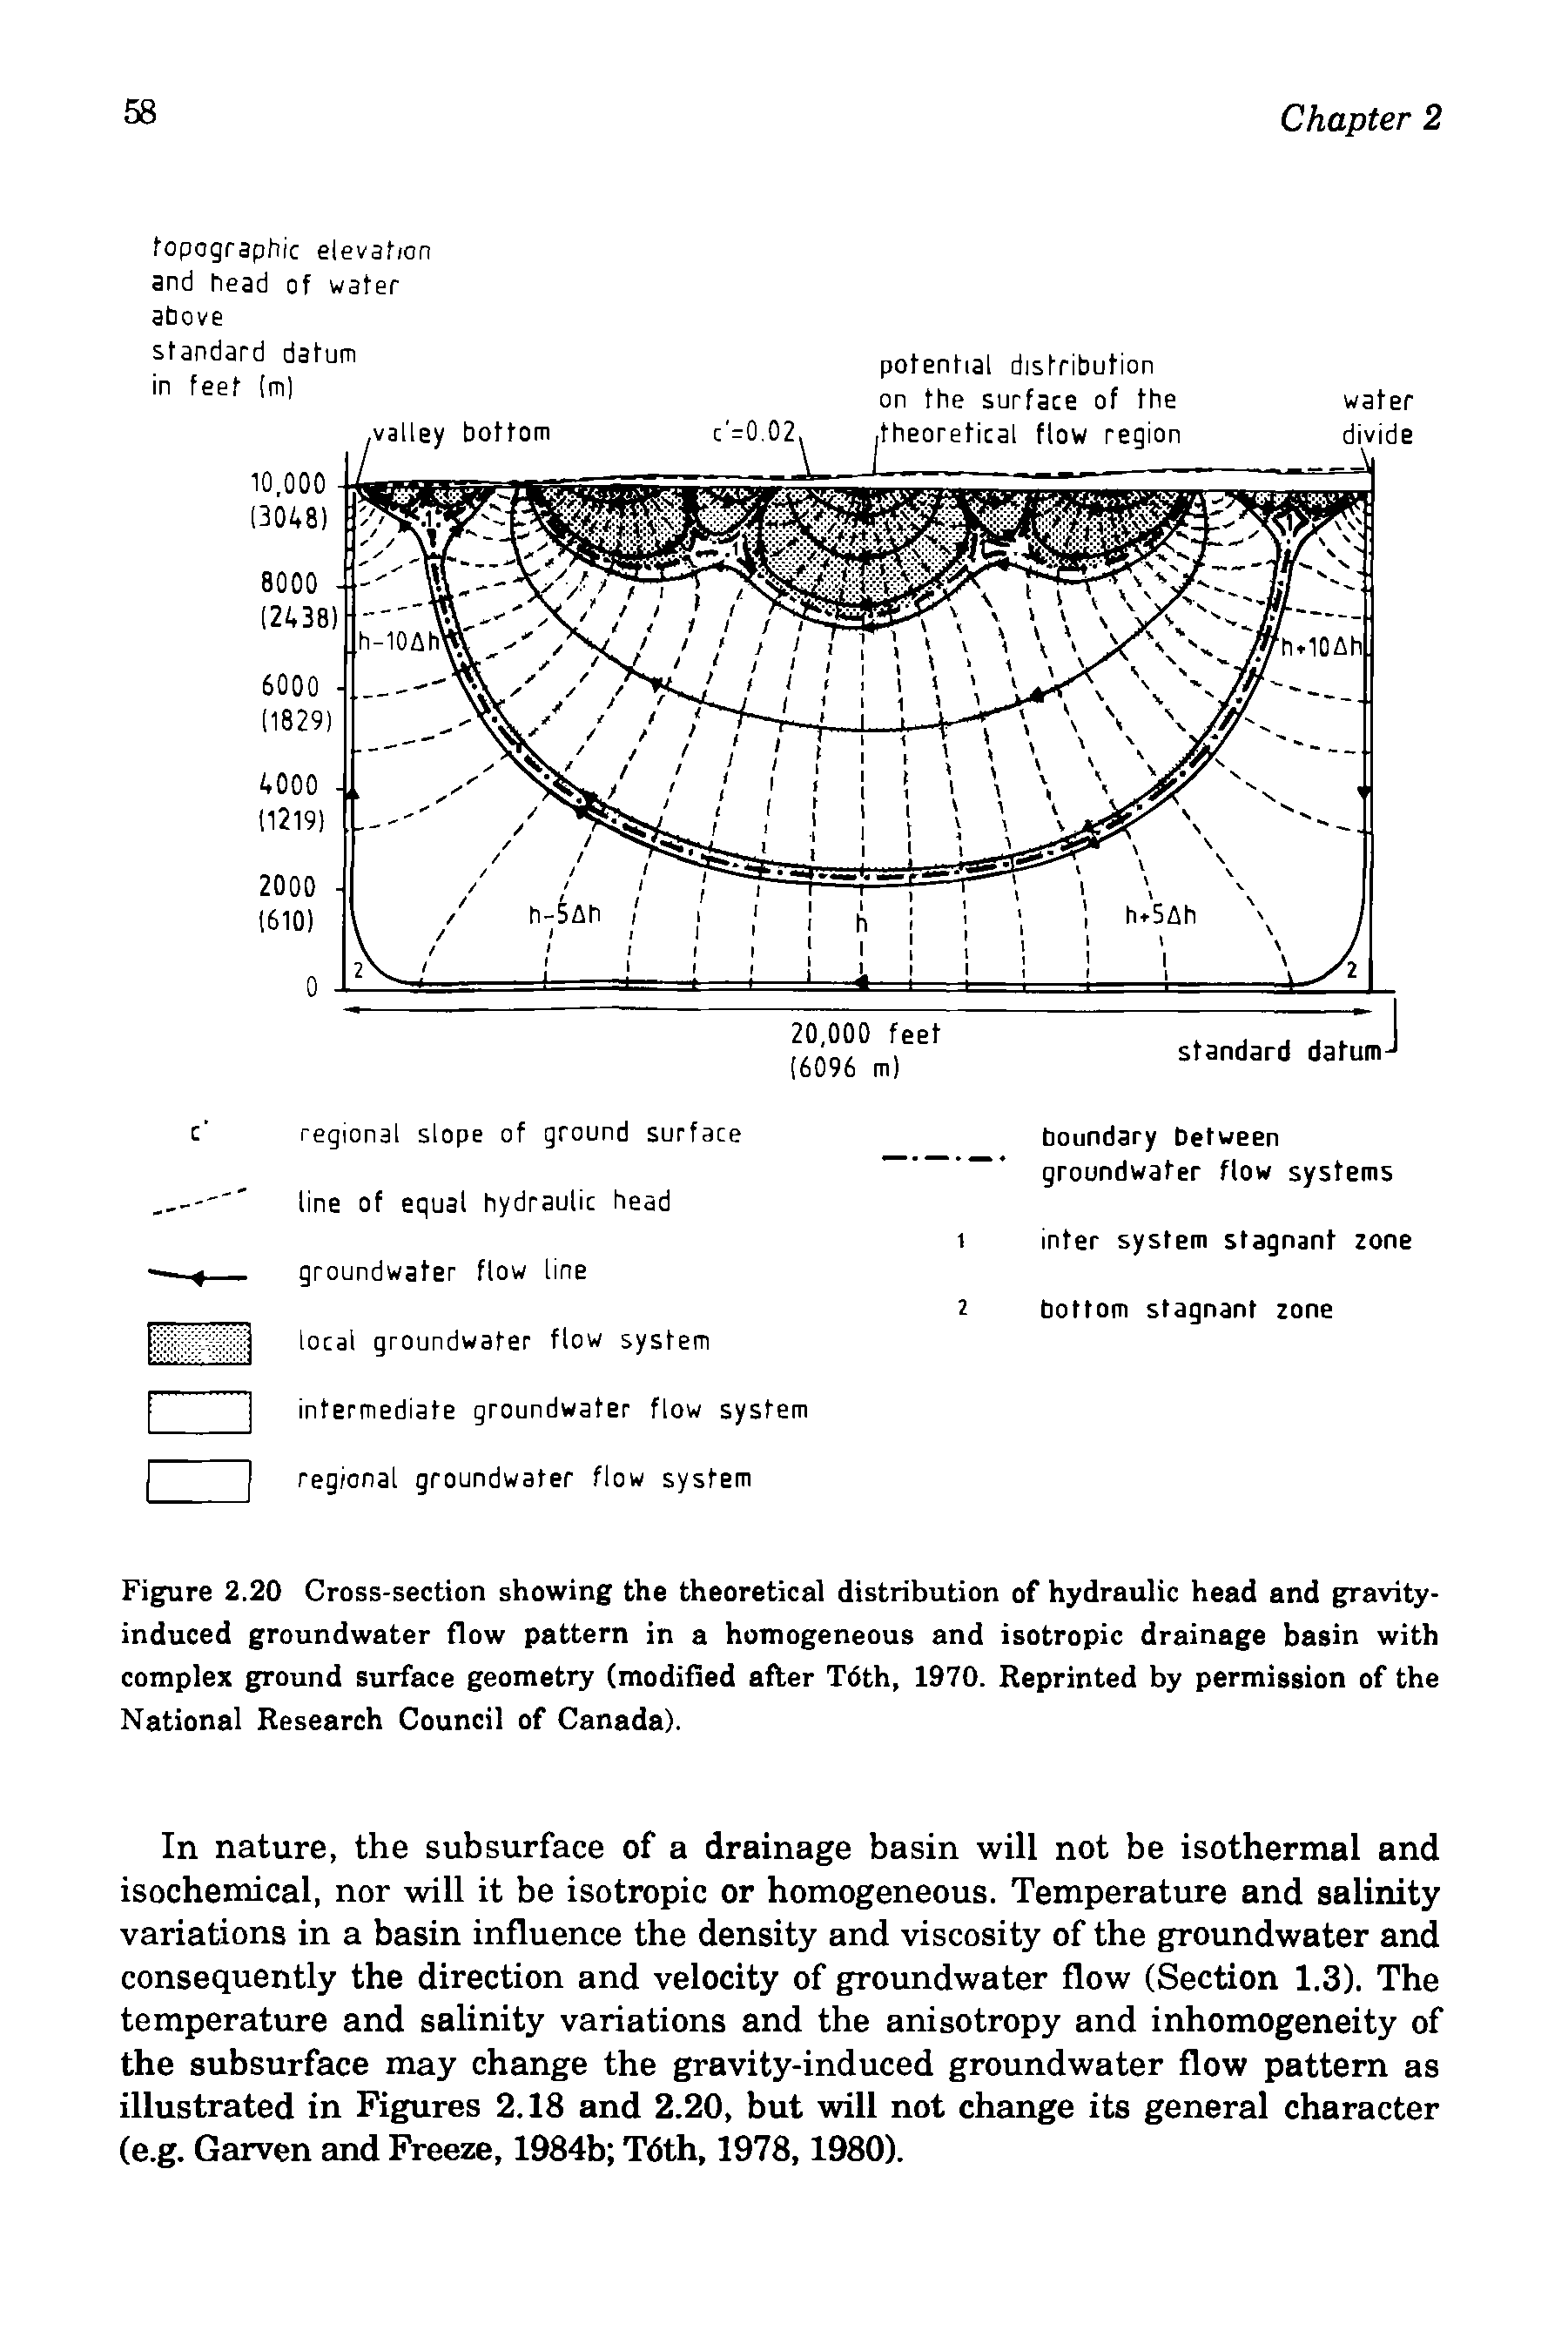 Figure 2.20 Cross-section showing the theoretical distribution of hydraulic head and gravity-induced groundwater flow pattern in a homogeneous and isotropic drainage basin with complex ground surface geometry (modified after T6th, 1970. Reprinted by permission of the National Research Council of Canada).